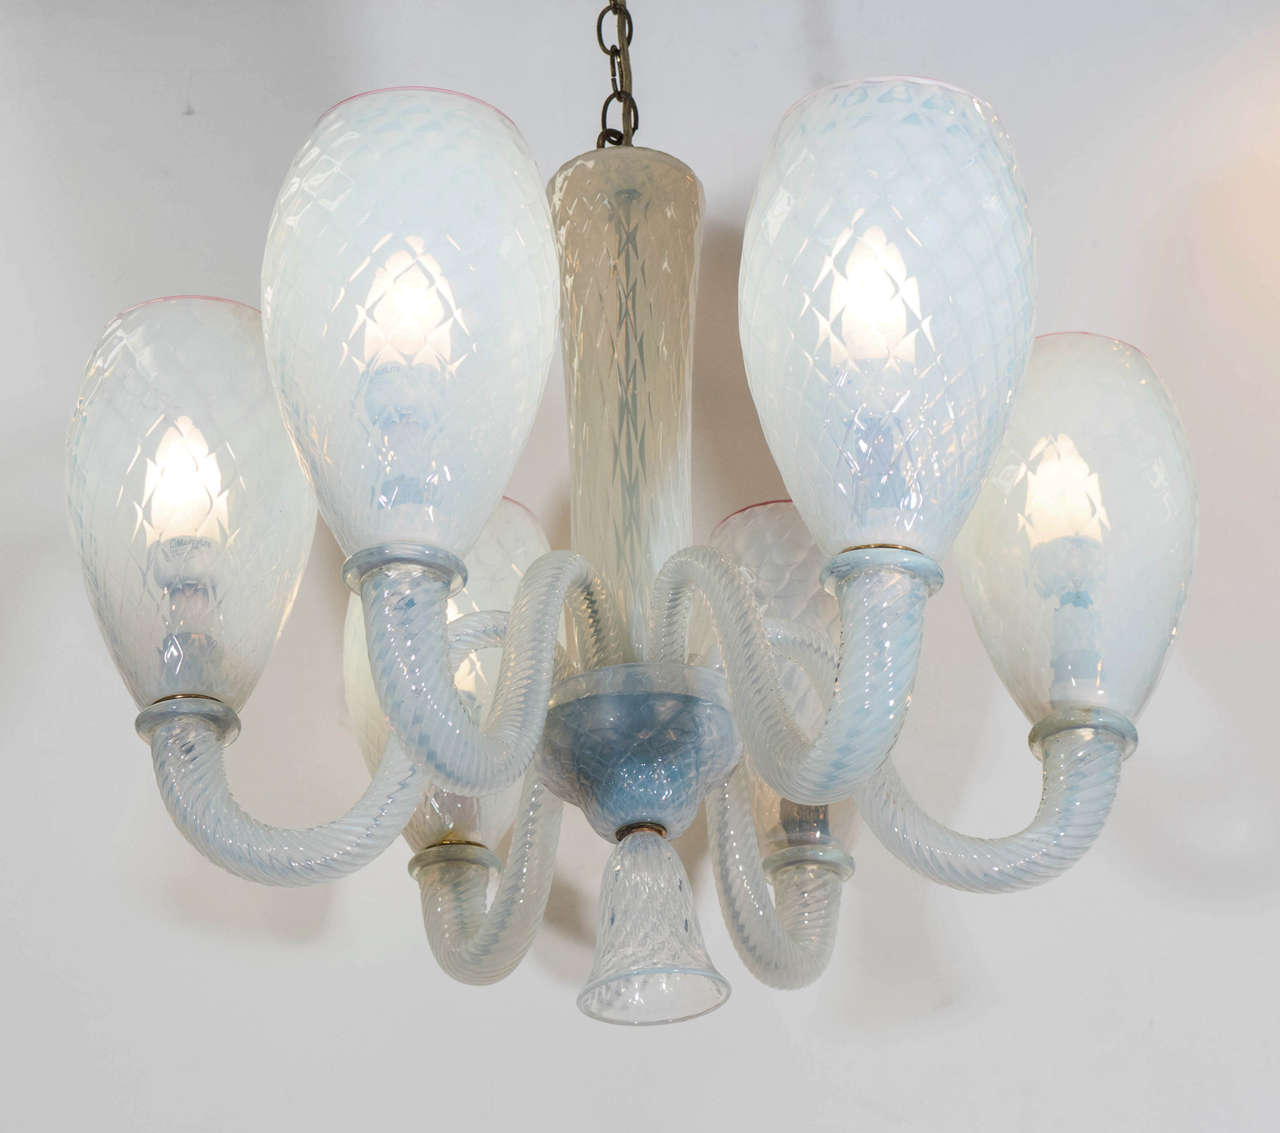 A vintage Murano glass chandelier in translucent opaline glass, with an iridescent sheen, produced circa 1960s by Barovier e Toso, with six scroll arms in twisted glass, traditional 'balloton' method applied to the bulb shades, central stem,